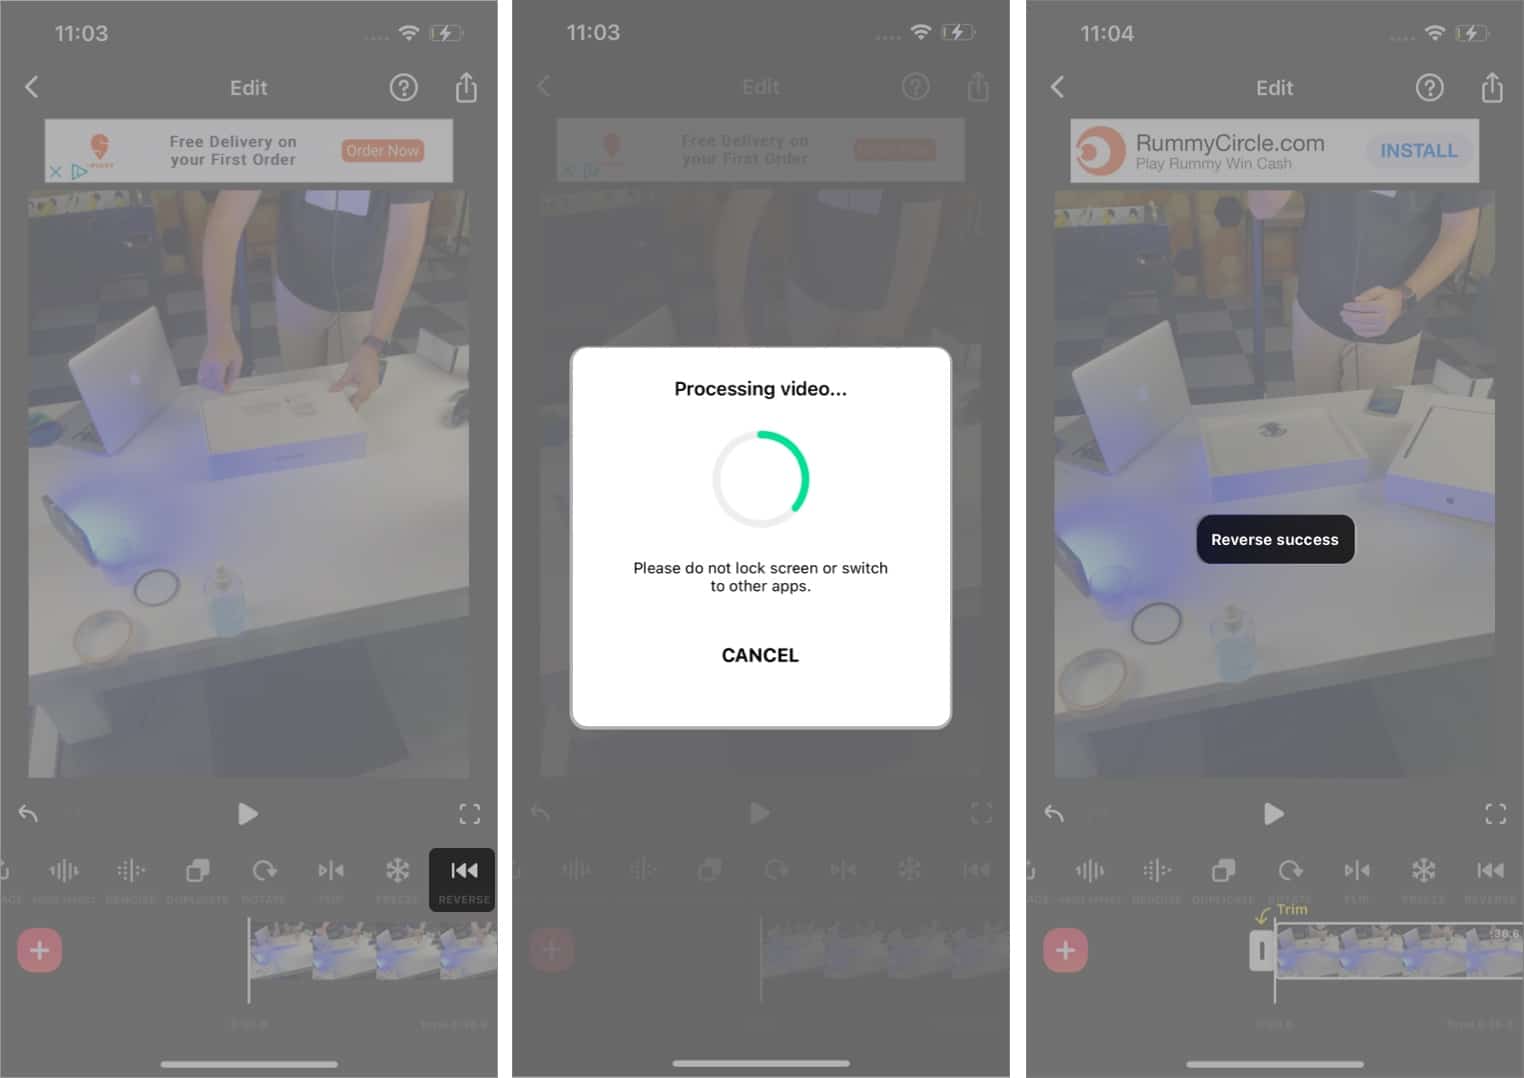 Further steps to reverse a video in InShot App